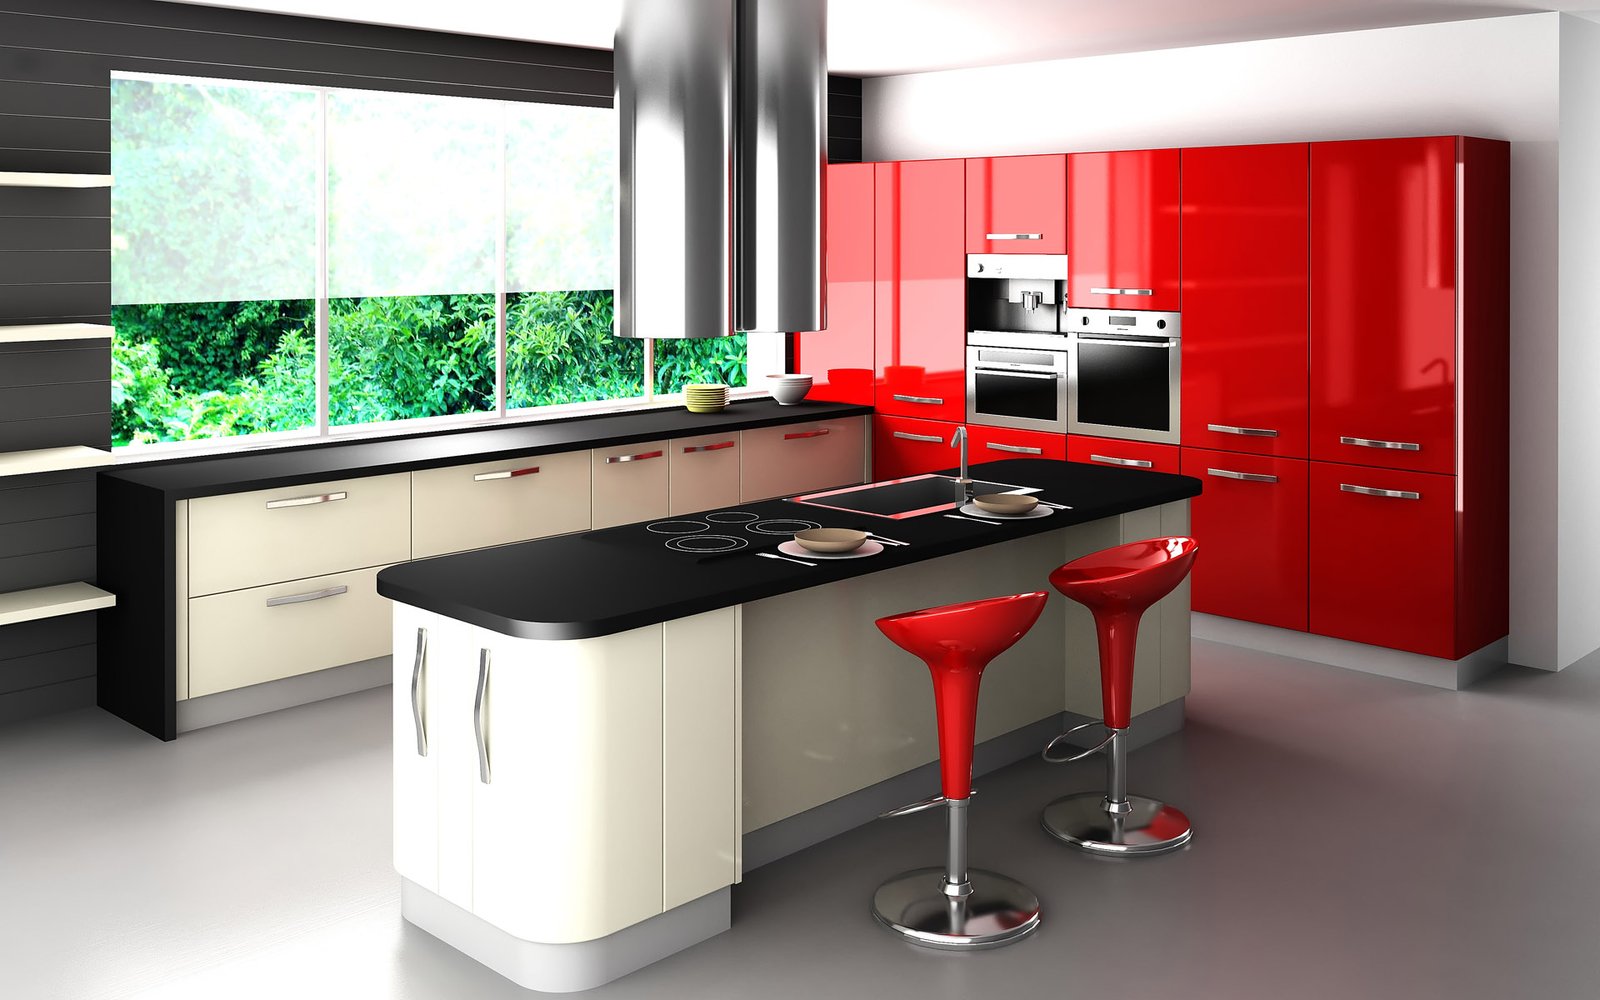 red-cabinets-kitchen-design-ideas red cabinets kitchen design ideas